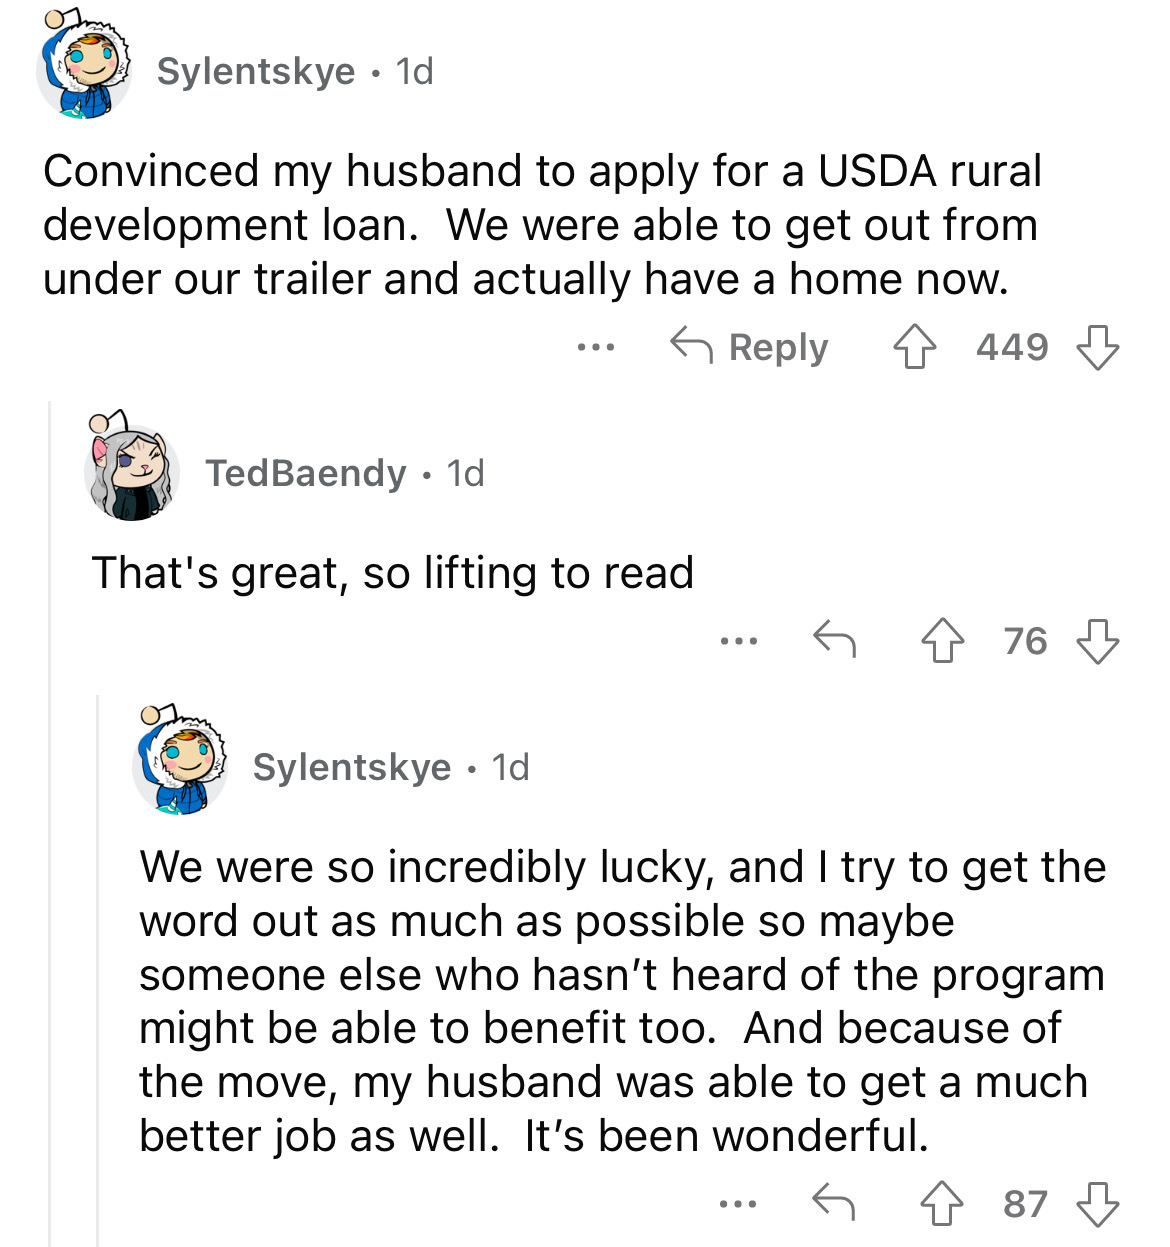 angle - Sylentskye. 1d Convinced my husband to apply for a Usda rural development loan. We were able to get out from under our trailer and actually have a home now. 449 TedBaendy. 1d That's great, so lifting to read Sylentskye 1d ... 76 We were so incredi